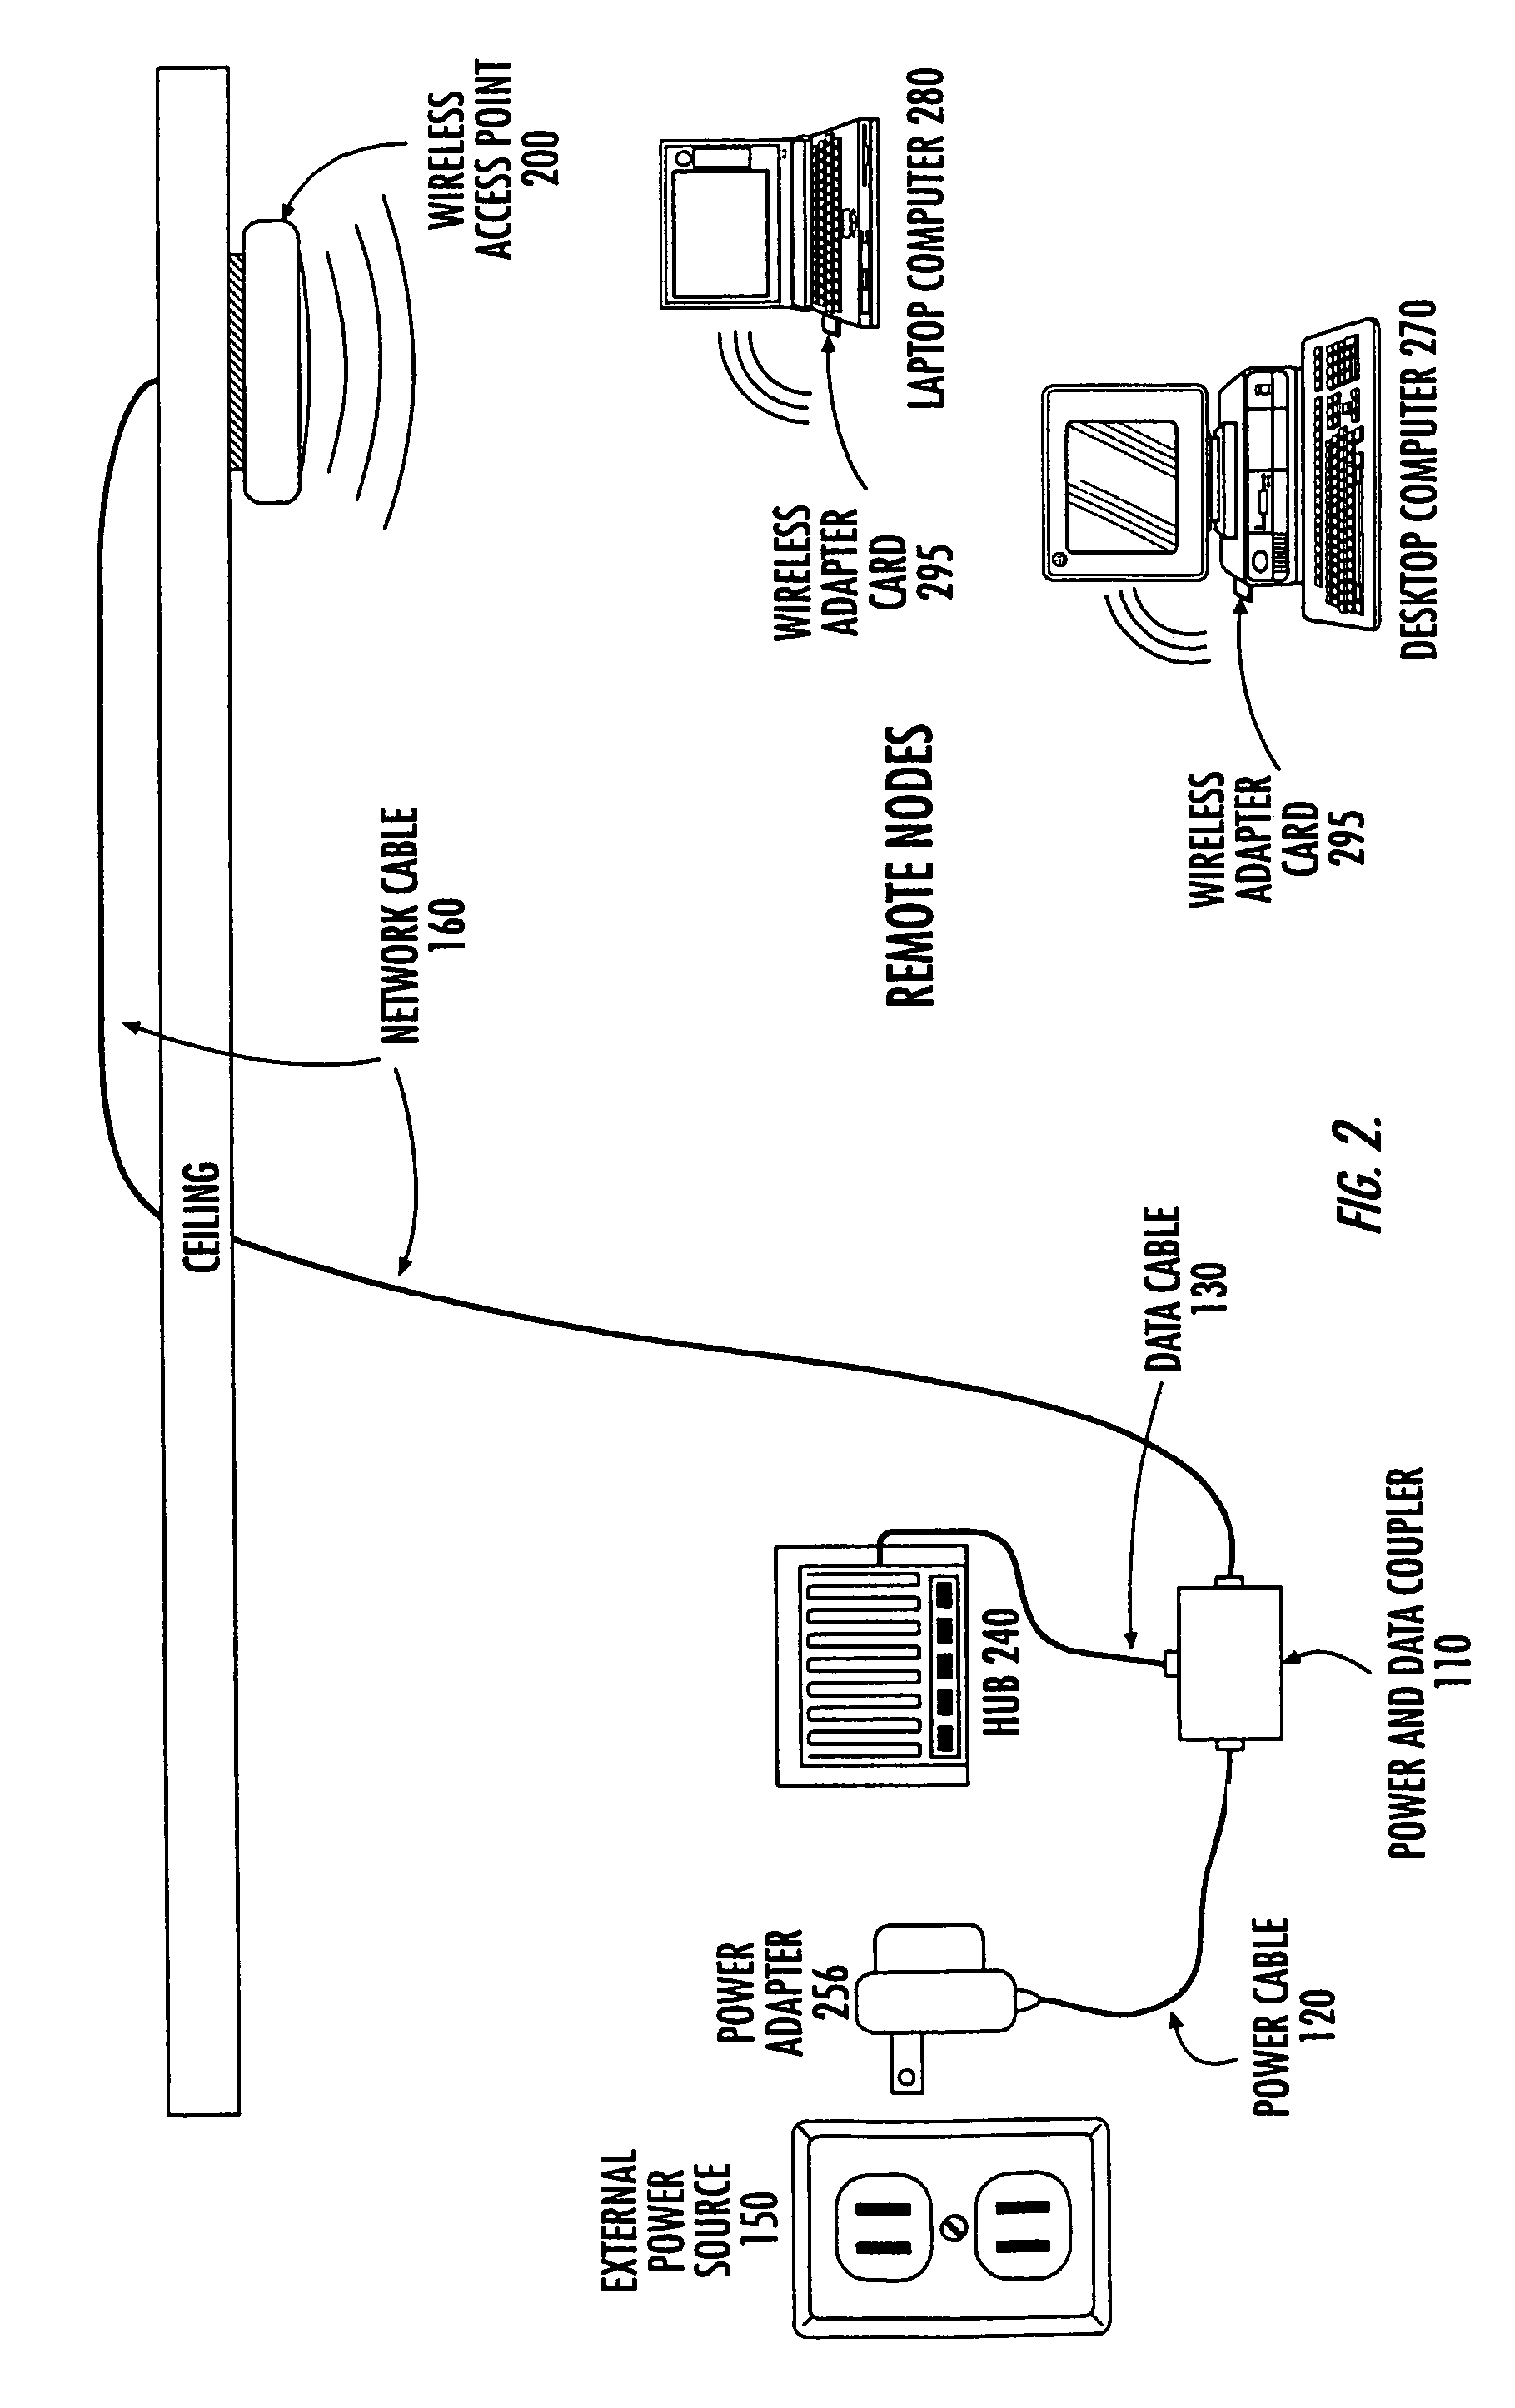 Power transfer apparatus for concurrently transmitting data and power over data wires